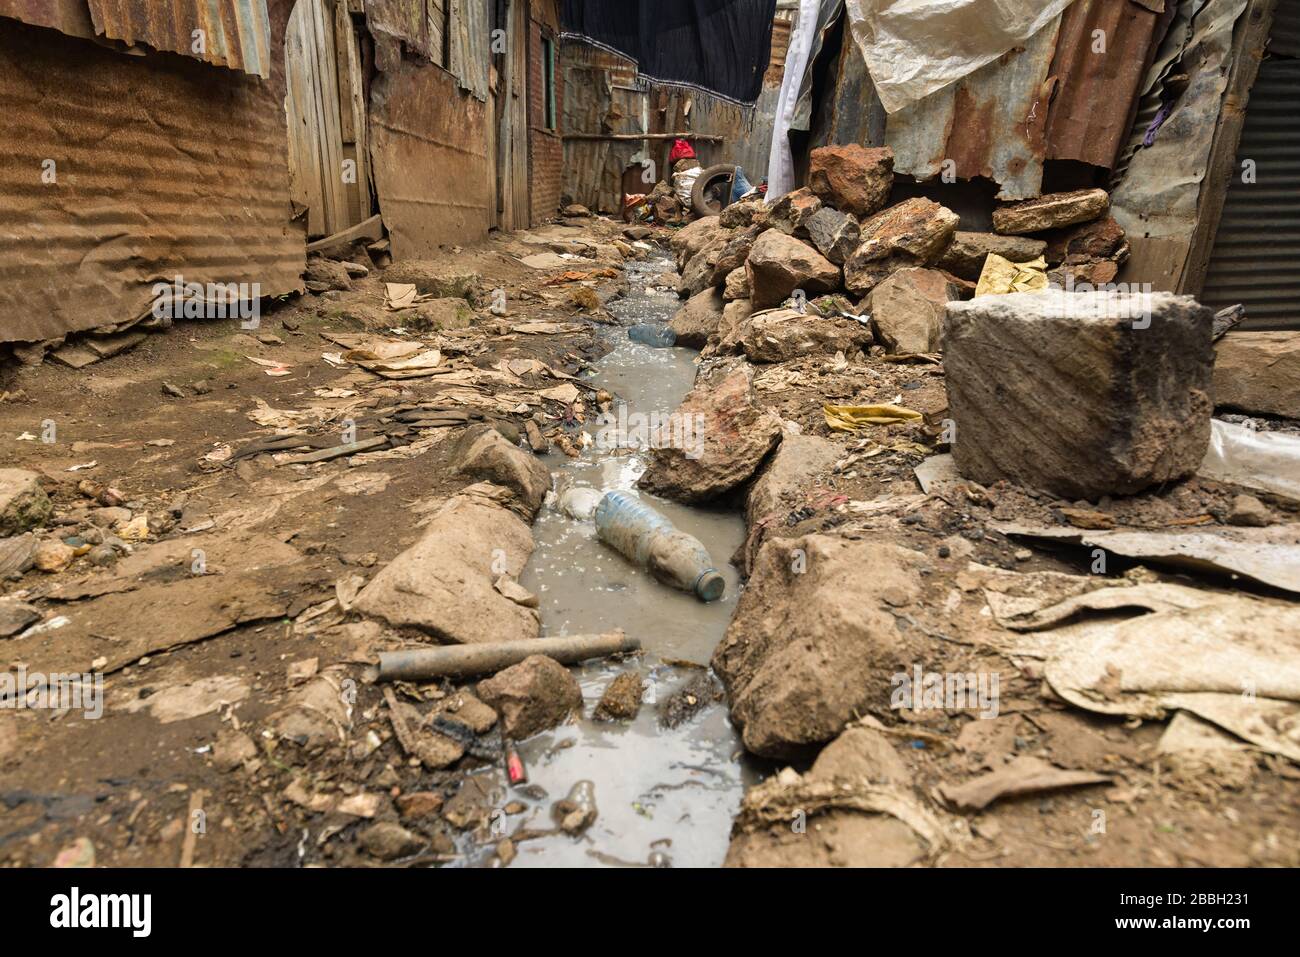 Open sewer running through small alley with metal slum shacks either side, Nairobi, Kenya Stock Photo